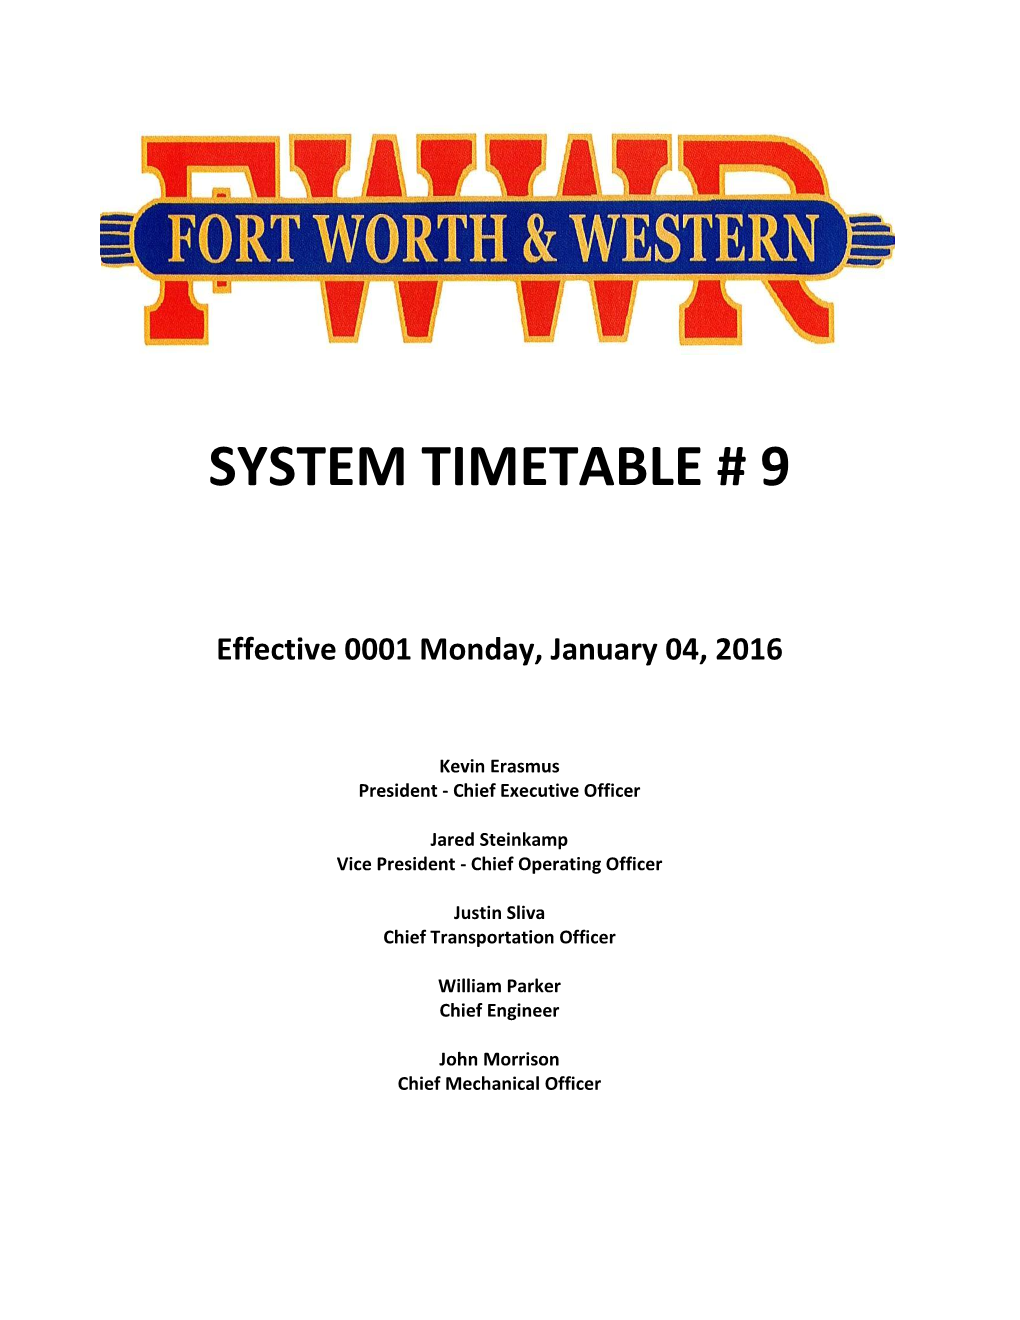 FWWR System Timetable and Special Instructions